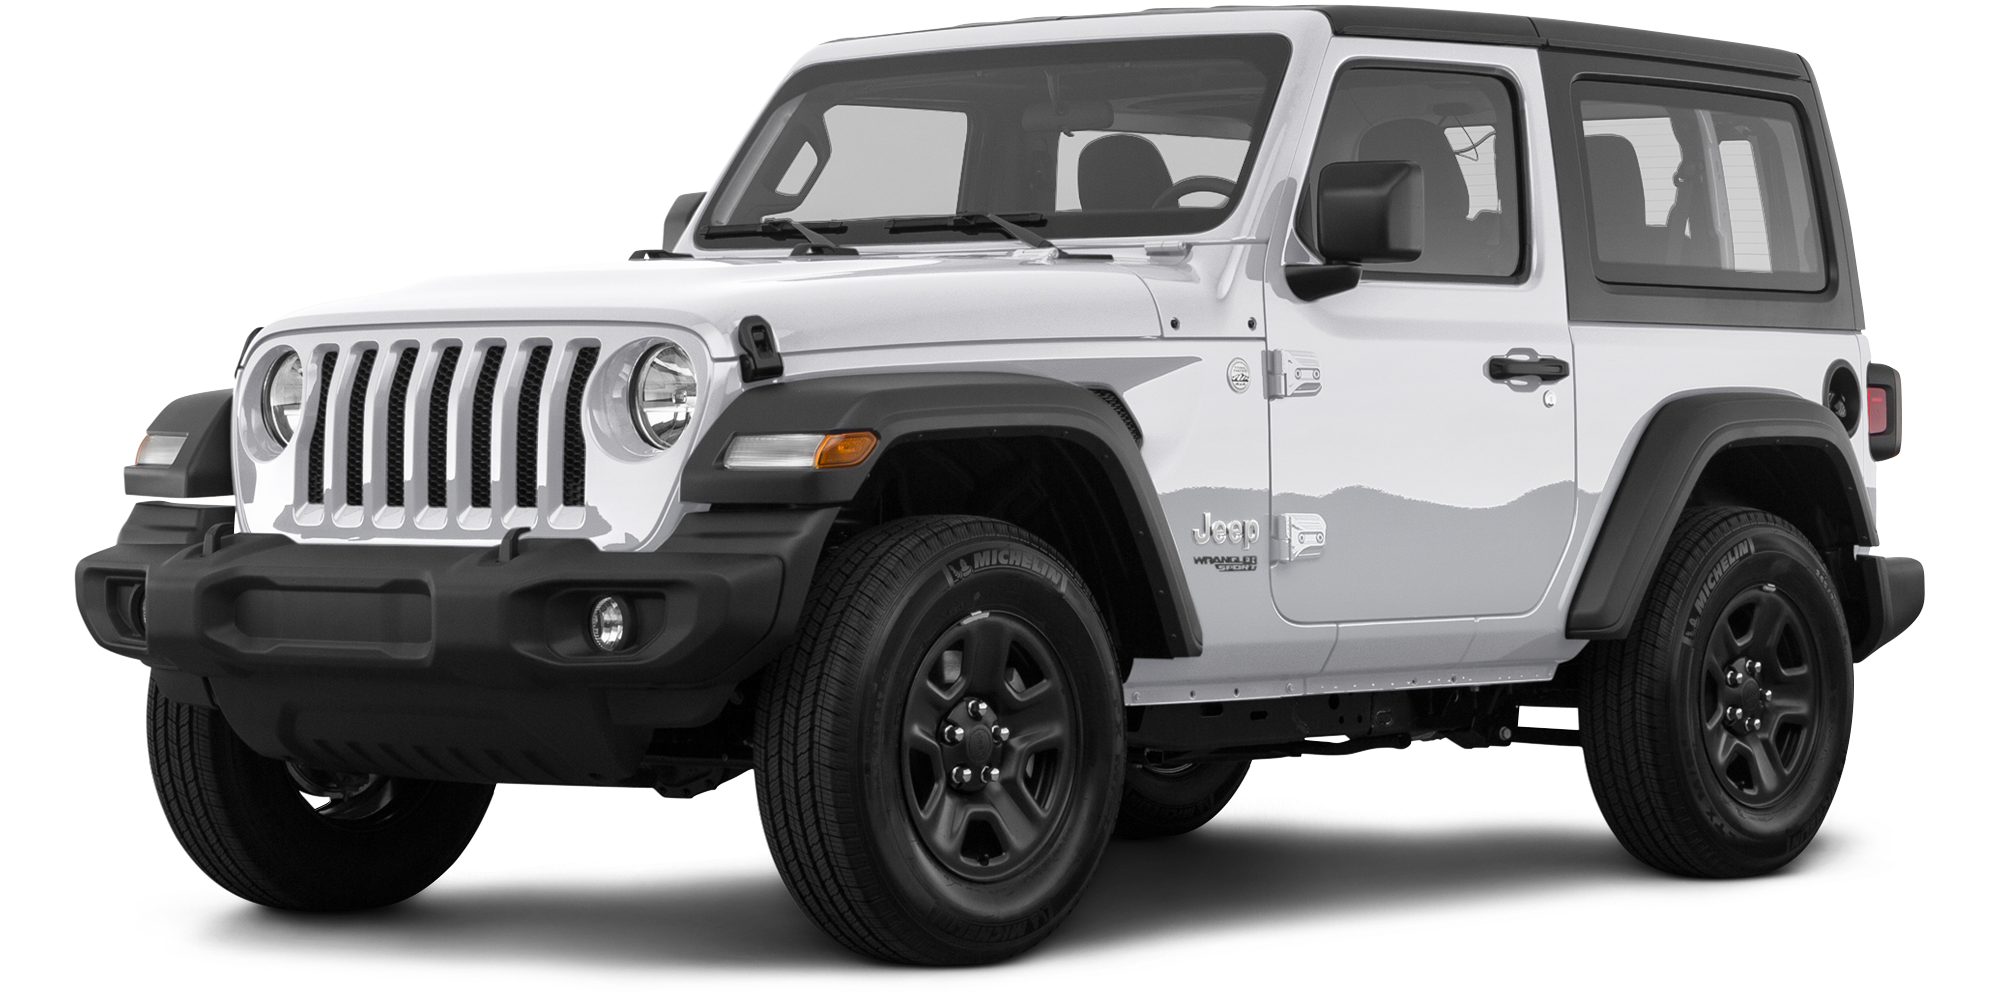 2022 Jeep Wrangler Incentives, Specials & Offers in Fort Myers FL